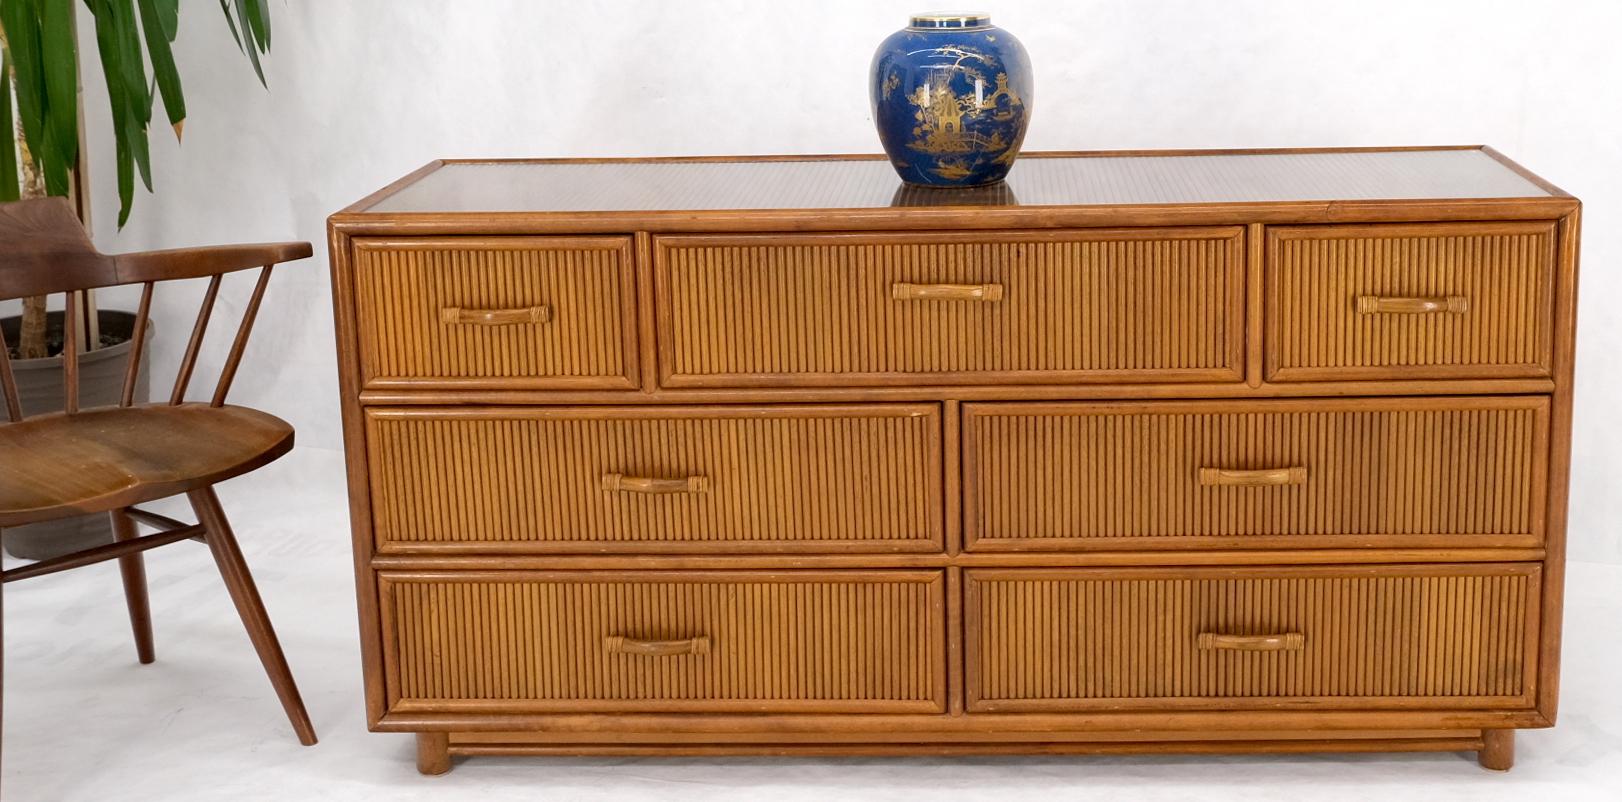 Seven Drawers Pencil Reed Bamboo Rattan Style Long Dresser w/ Glass Top 2